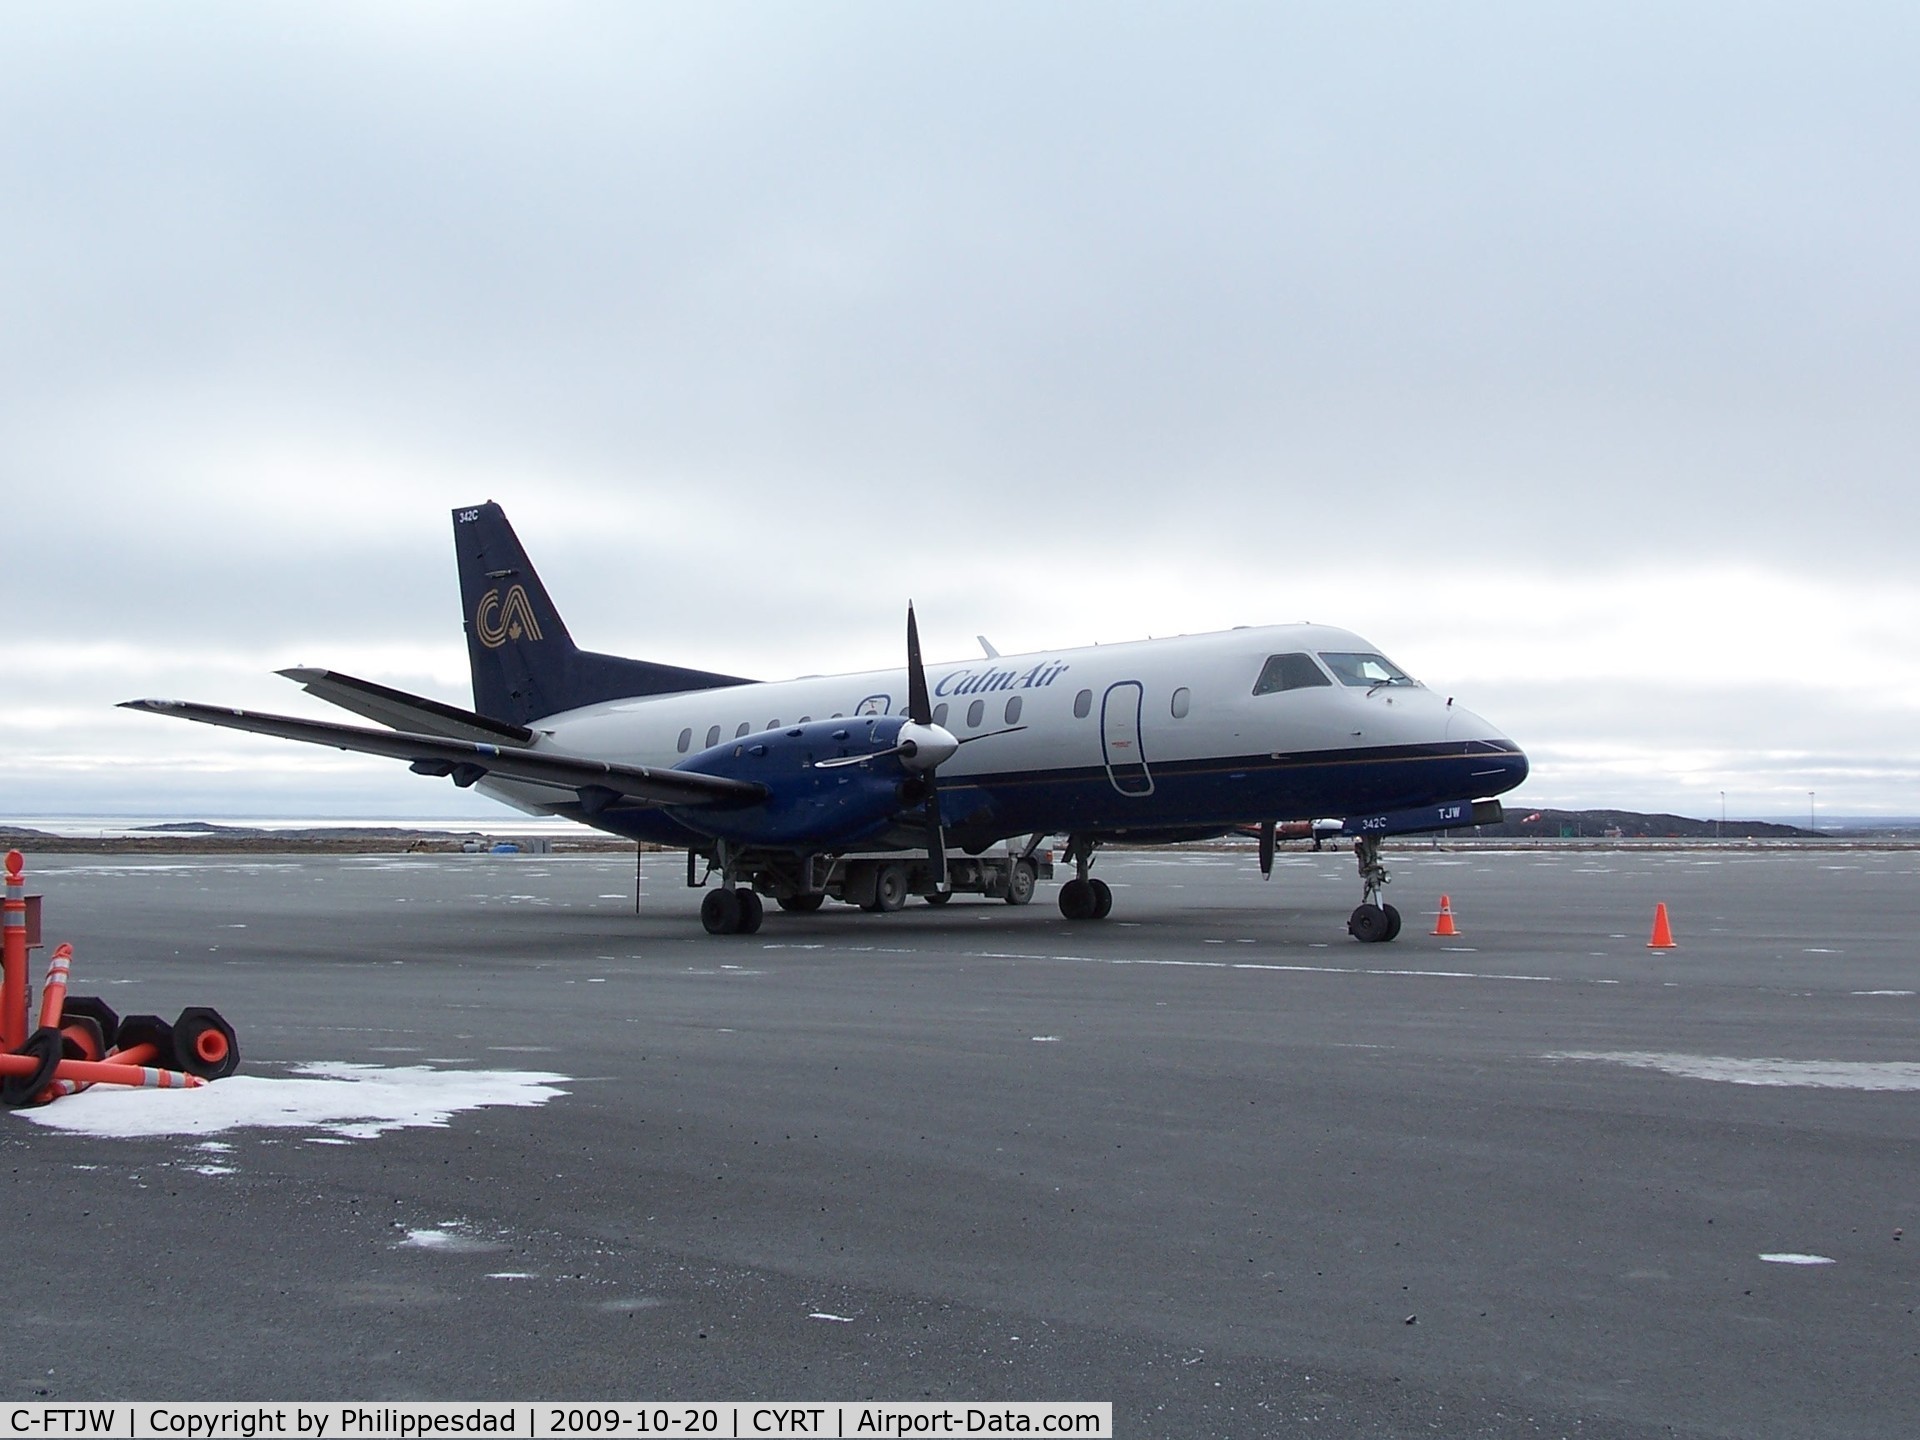 C-FTJW, 1995 Saab 340B C/N 340B-377, C-FTJW at Rankin Inlet, NU 2009oct20 3/4 front